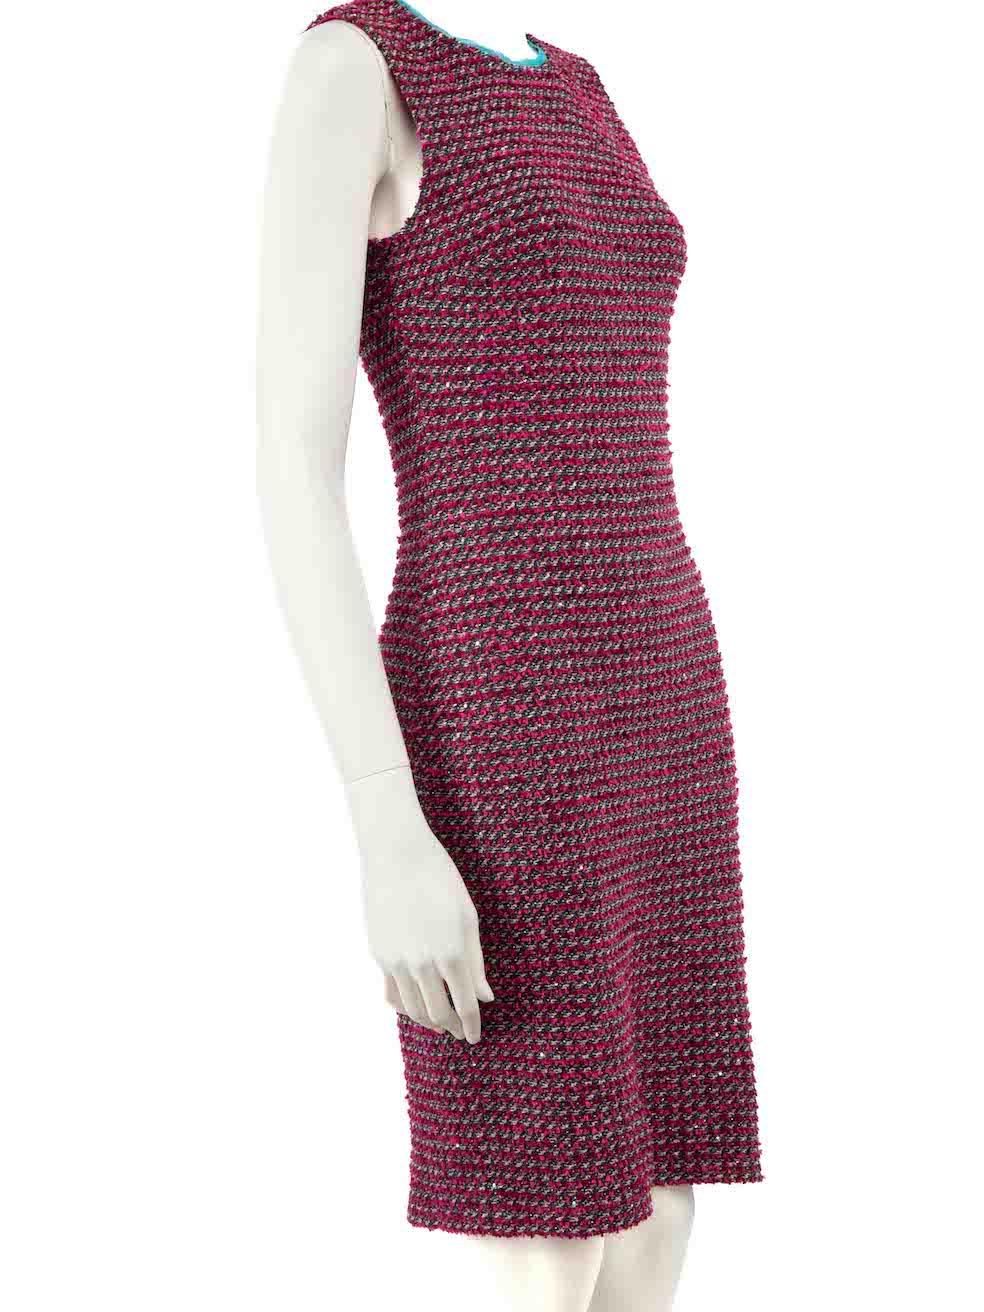 CONDITION is Very good. Hardly any visible wear to dress is evident on this used St. John designer resale item.
 
 Details
 Pink
 Tweed
 Knee length dress
 Round neckline
 Sleeveless
 Contrast teal detail
 Back zip closure
 
 
 Made in Mexico
 
